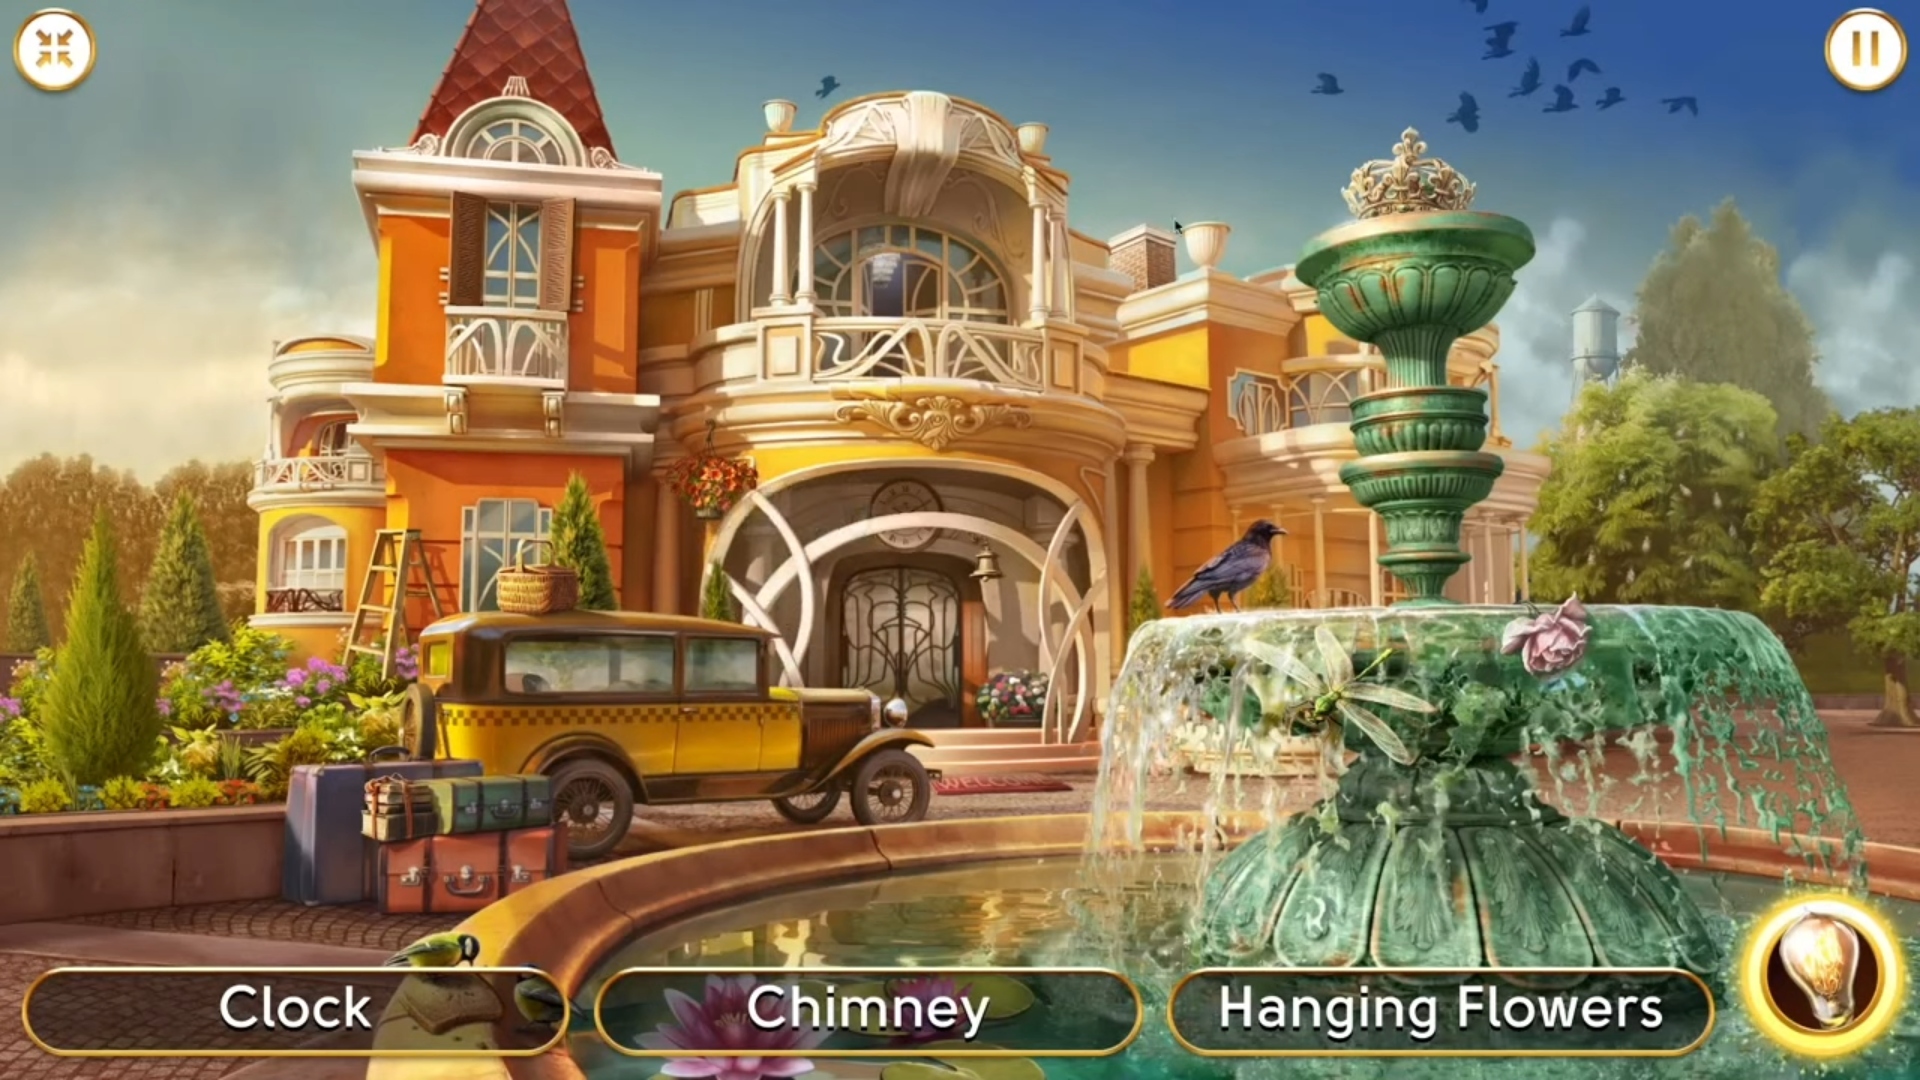 Addictive games - June's Journey. A screenshot shows a stately home ready to be investigated.